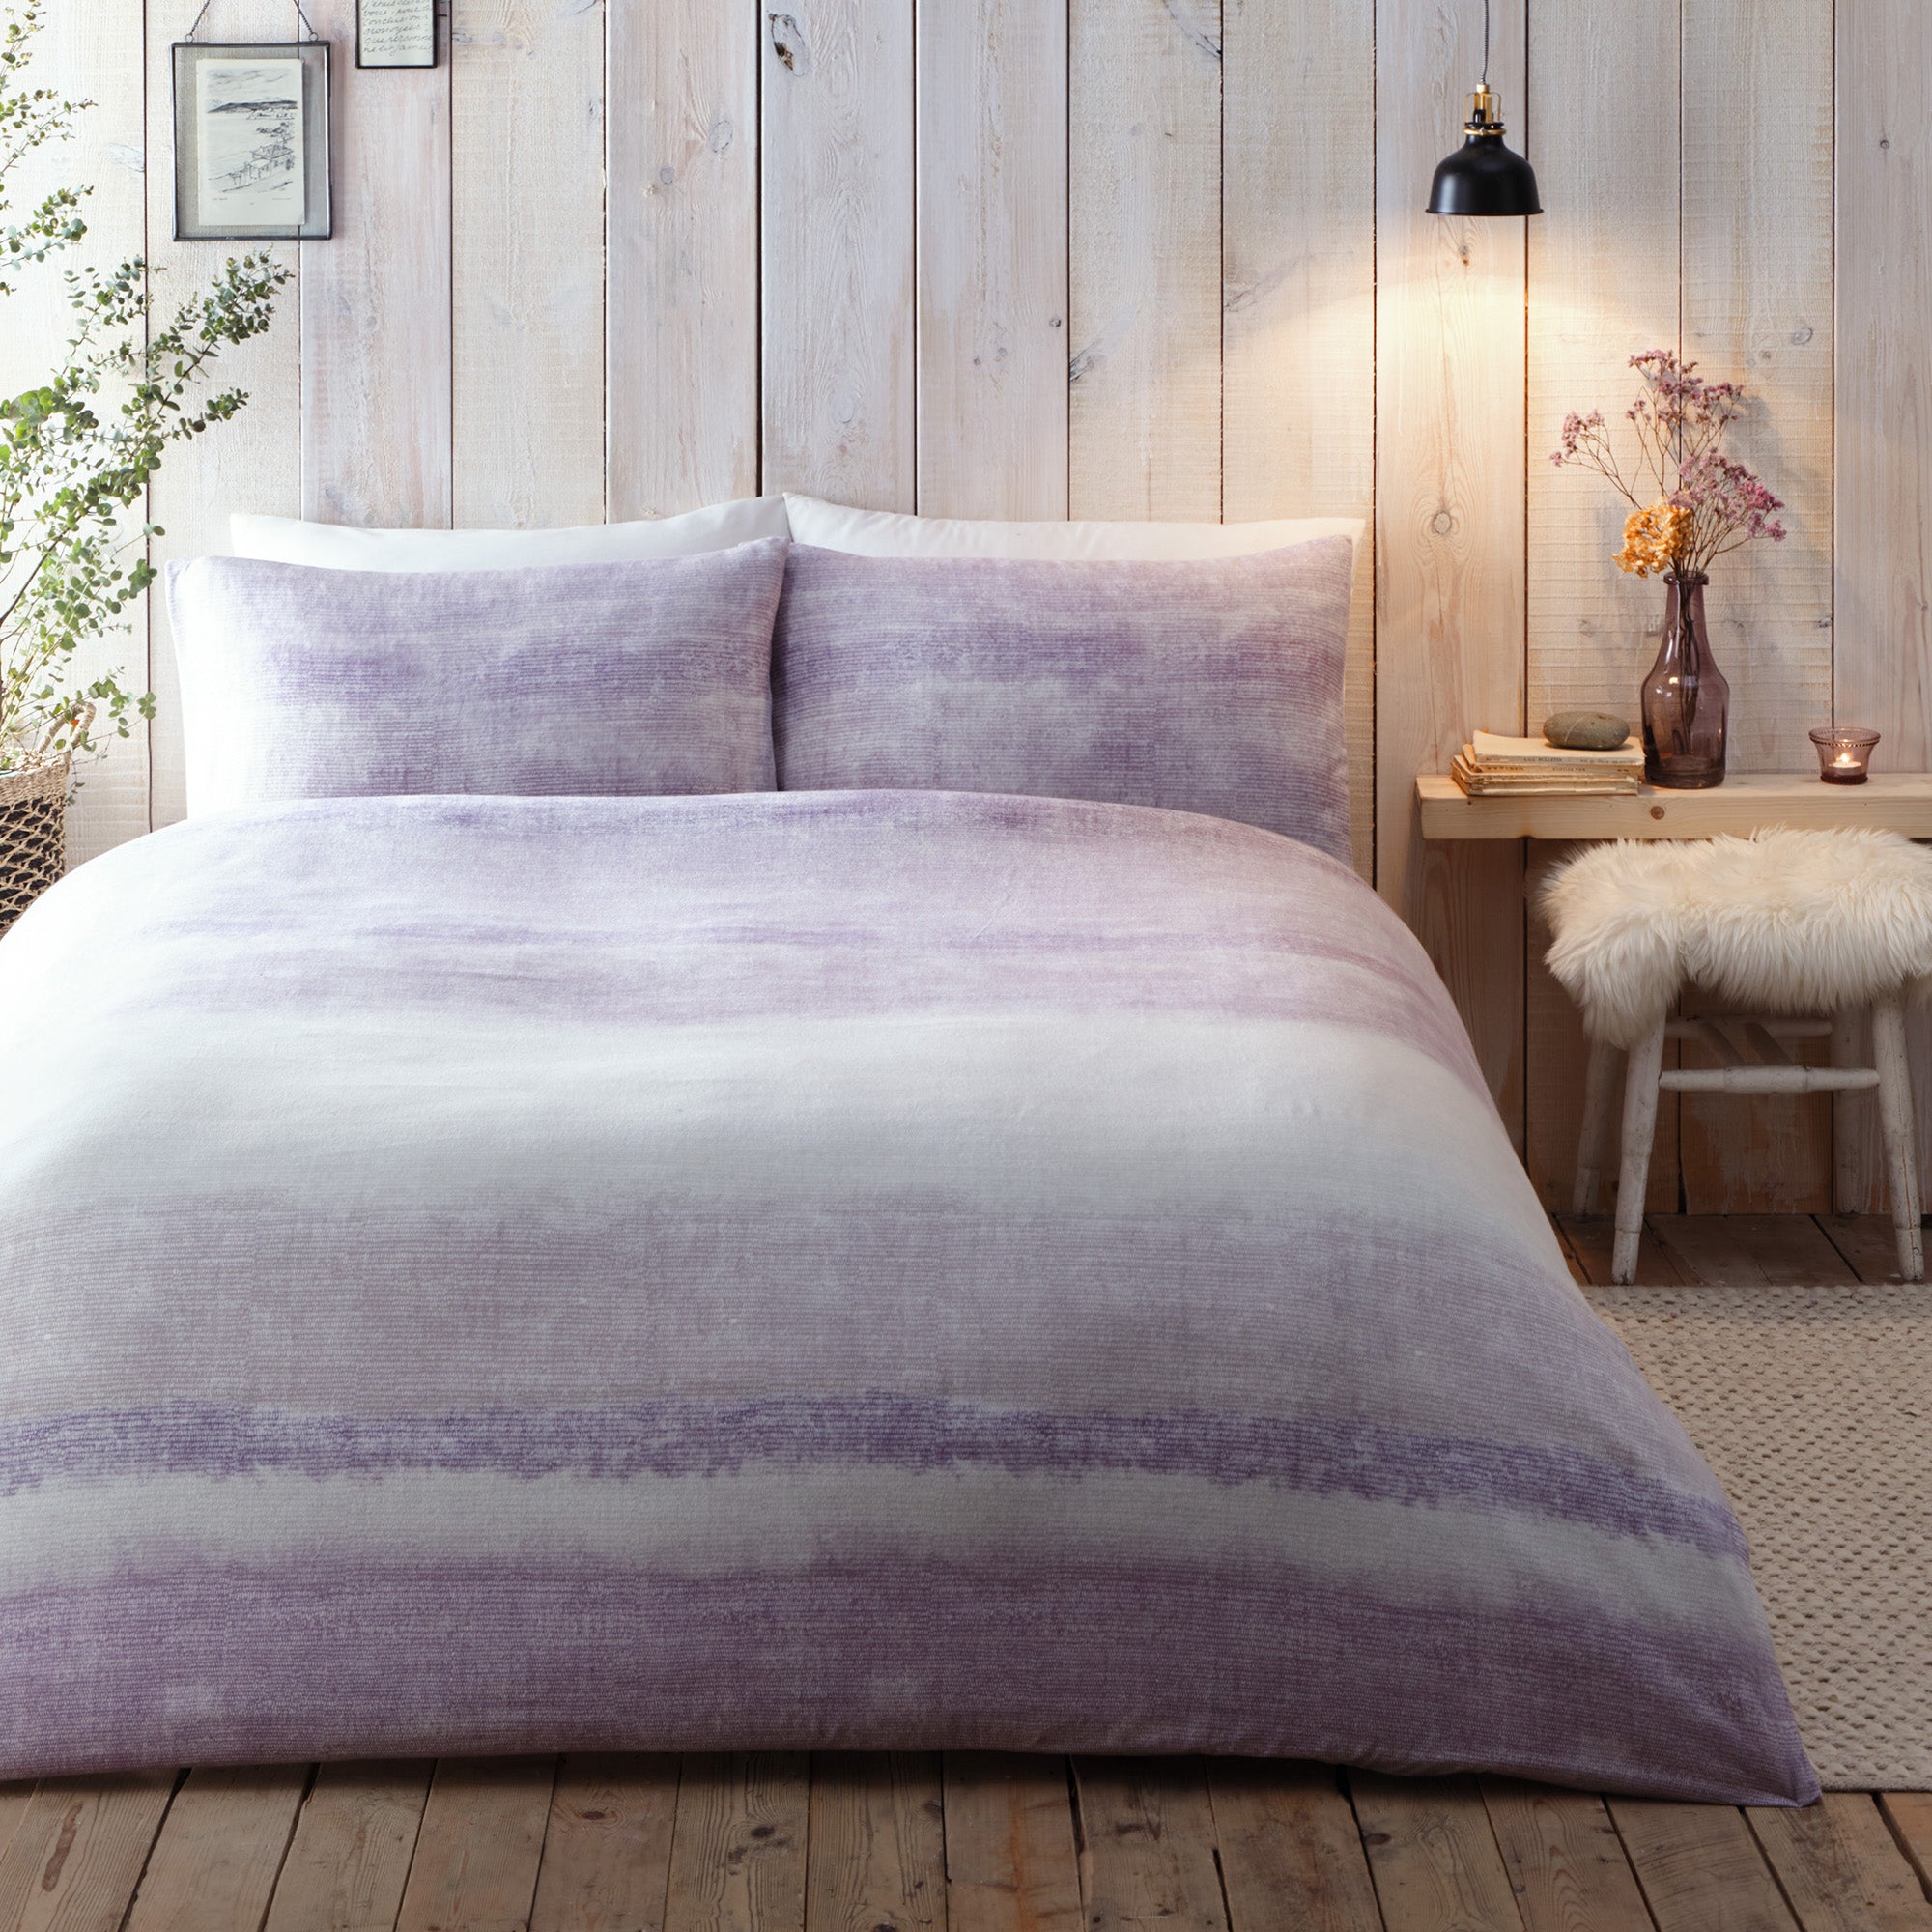 Duvet Cover Set Anson Stripe by Appletree Hygge in Mauve